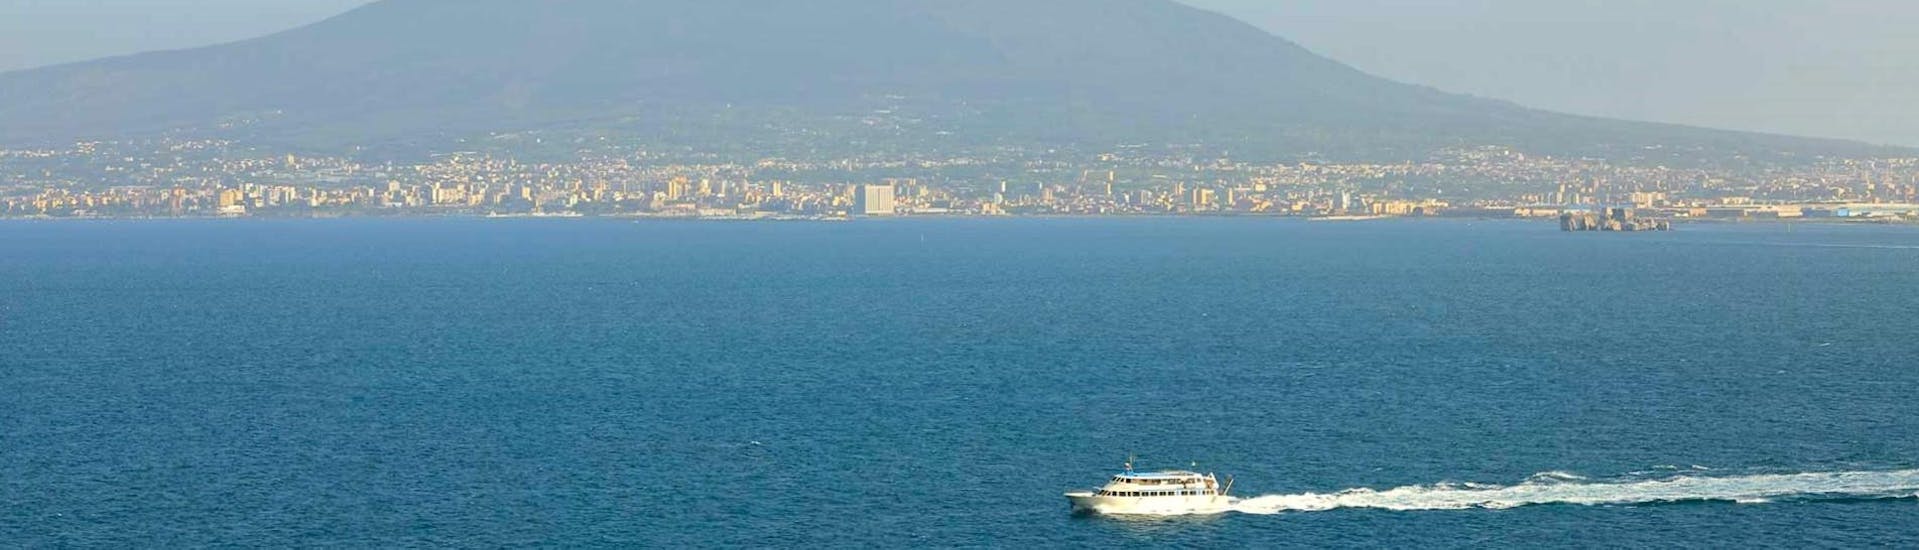 The boat Benedetta II is navigating along the Sorrento Coast.